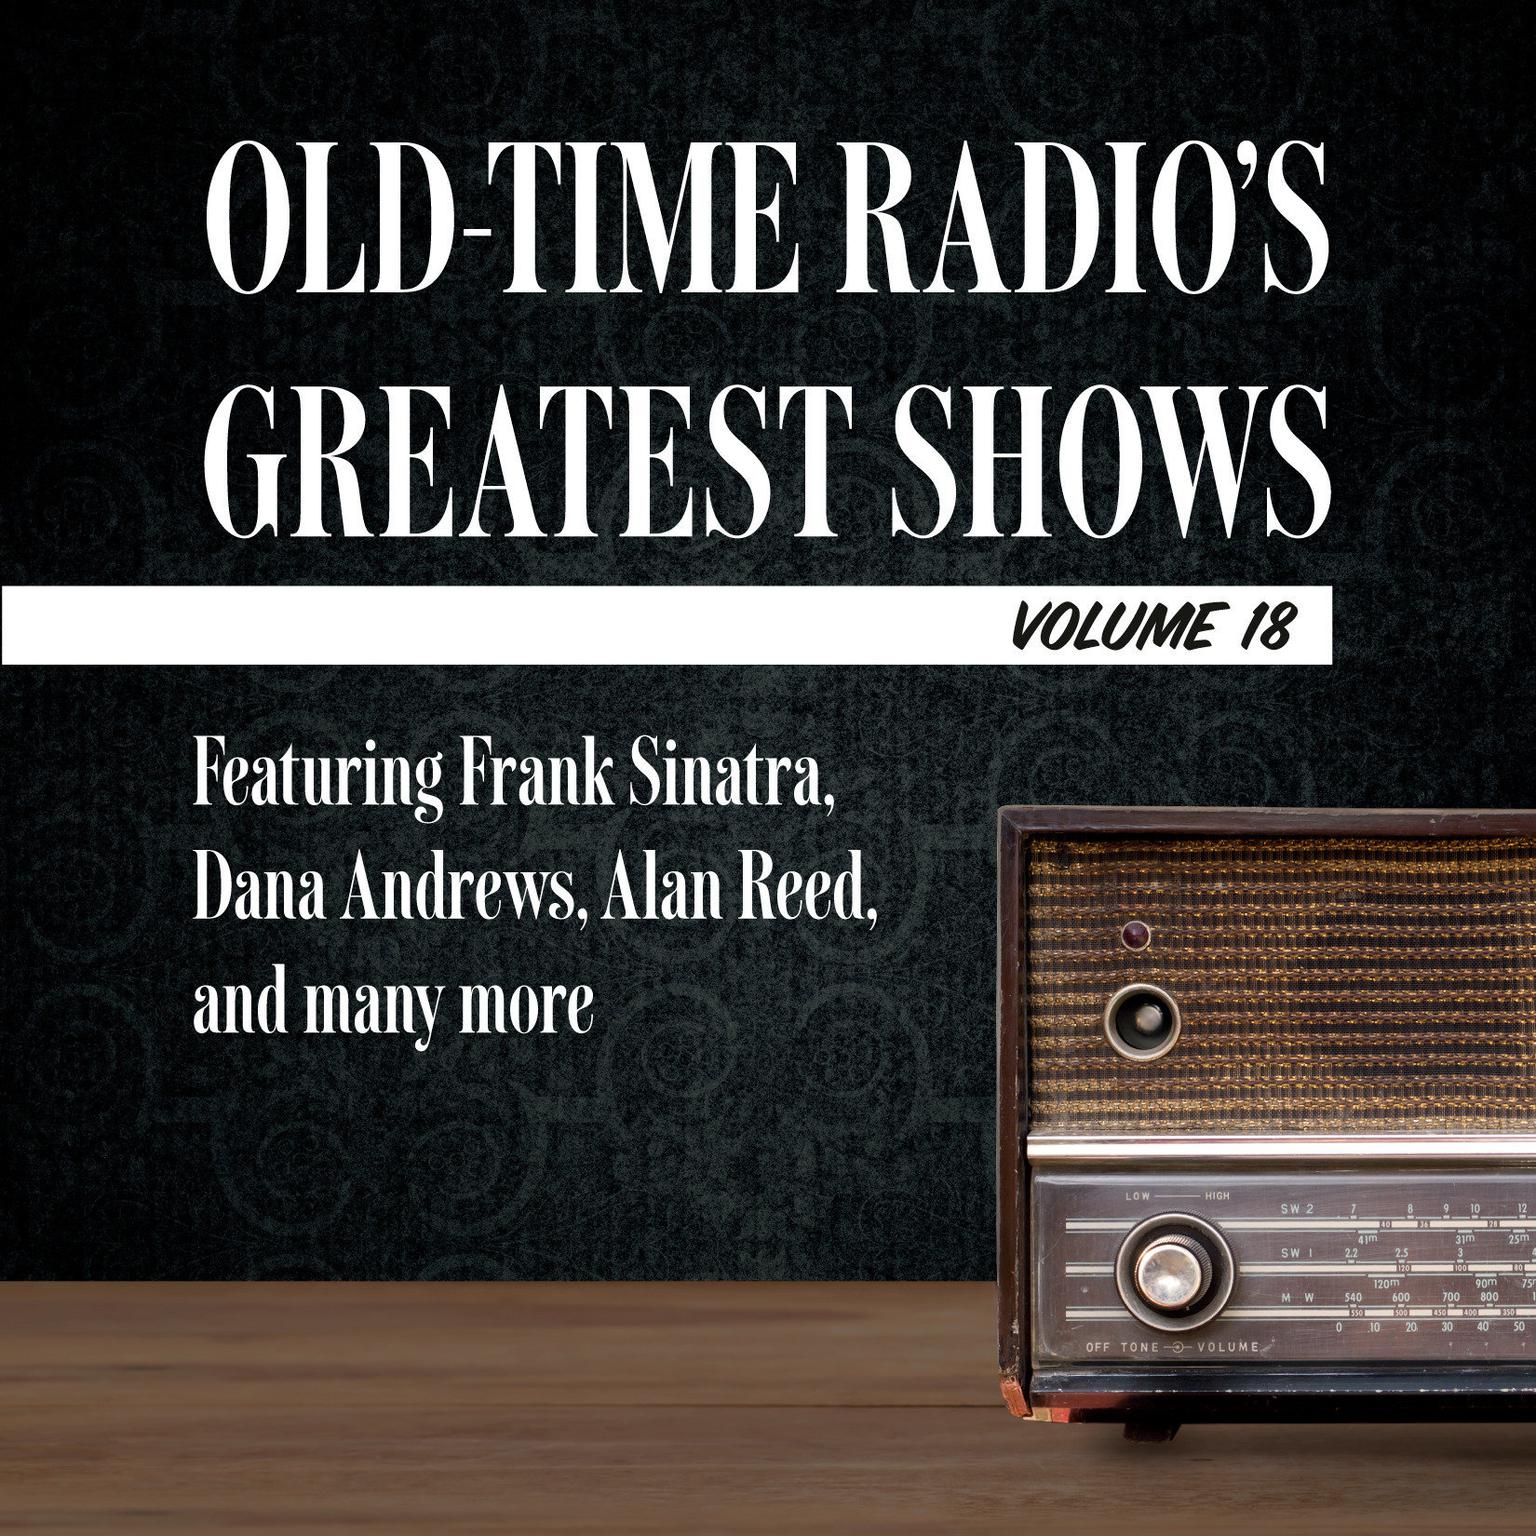 Old-Time Radios Greatest Shows, Volume 18: Featuring Frank Sinatra, Dana Andrews, Alan Reed, and many more Audiobook, by Carl Amari